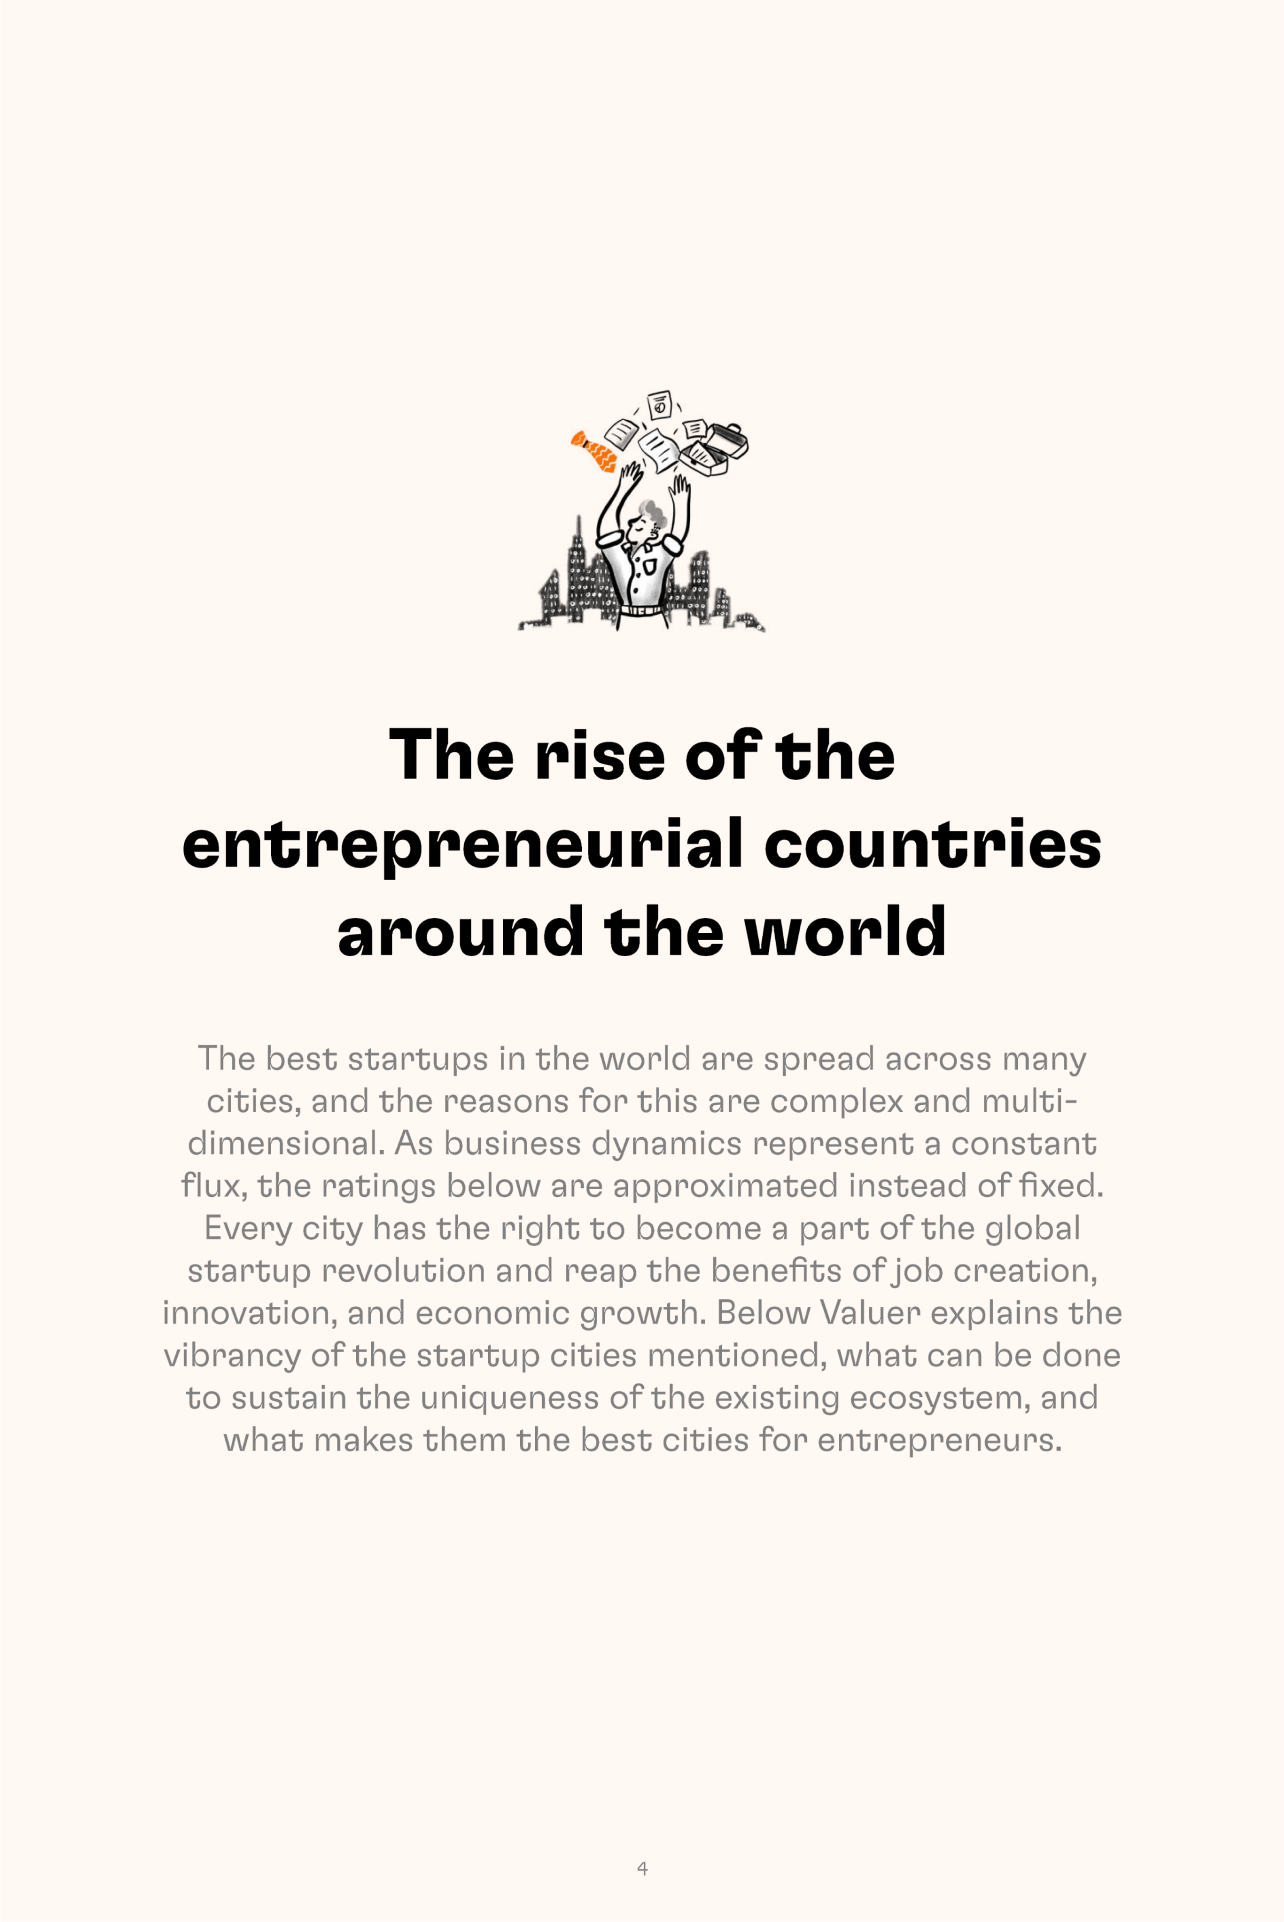 The rise of entrepreneurial countries around the world 